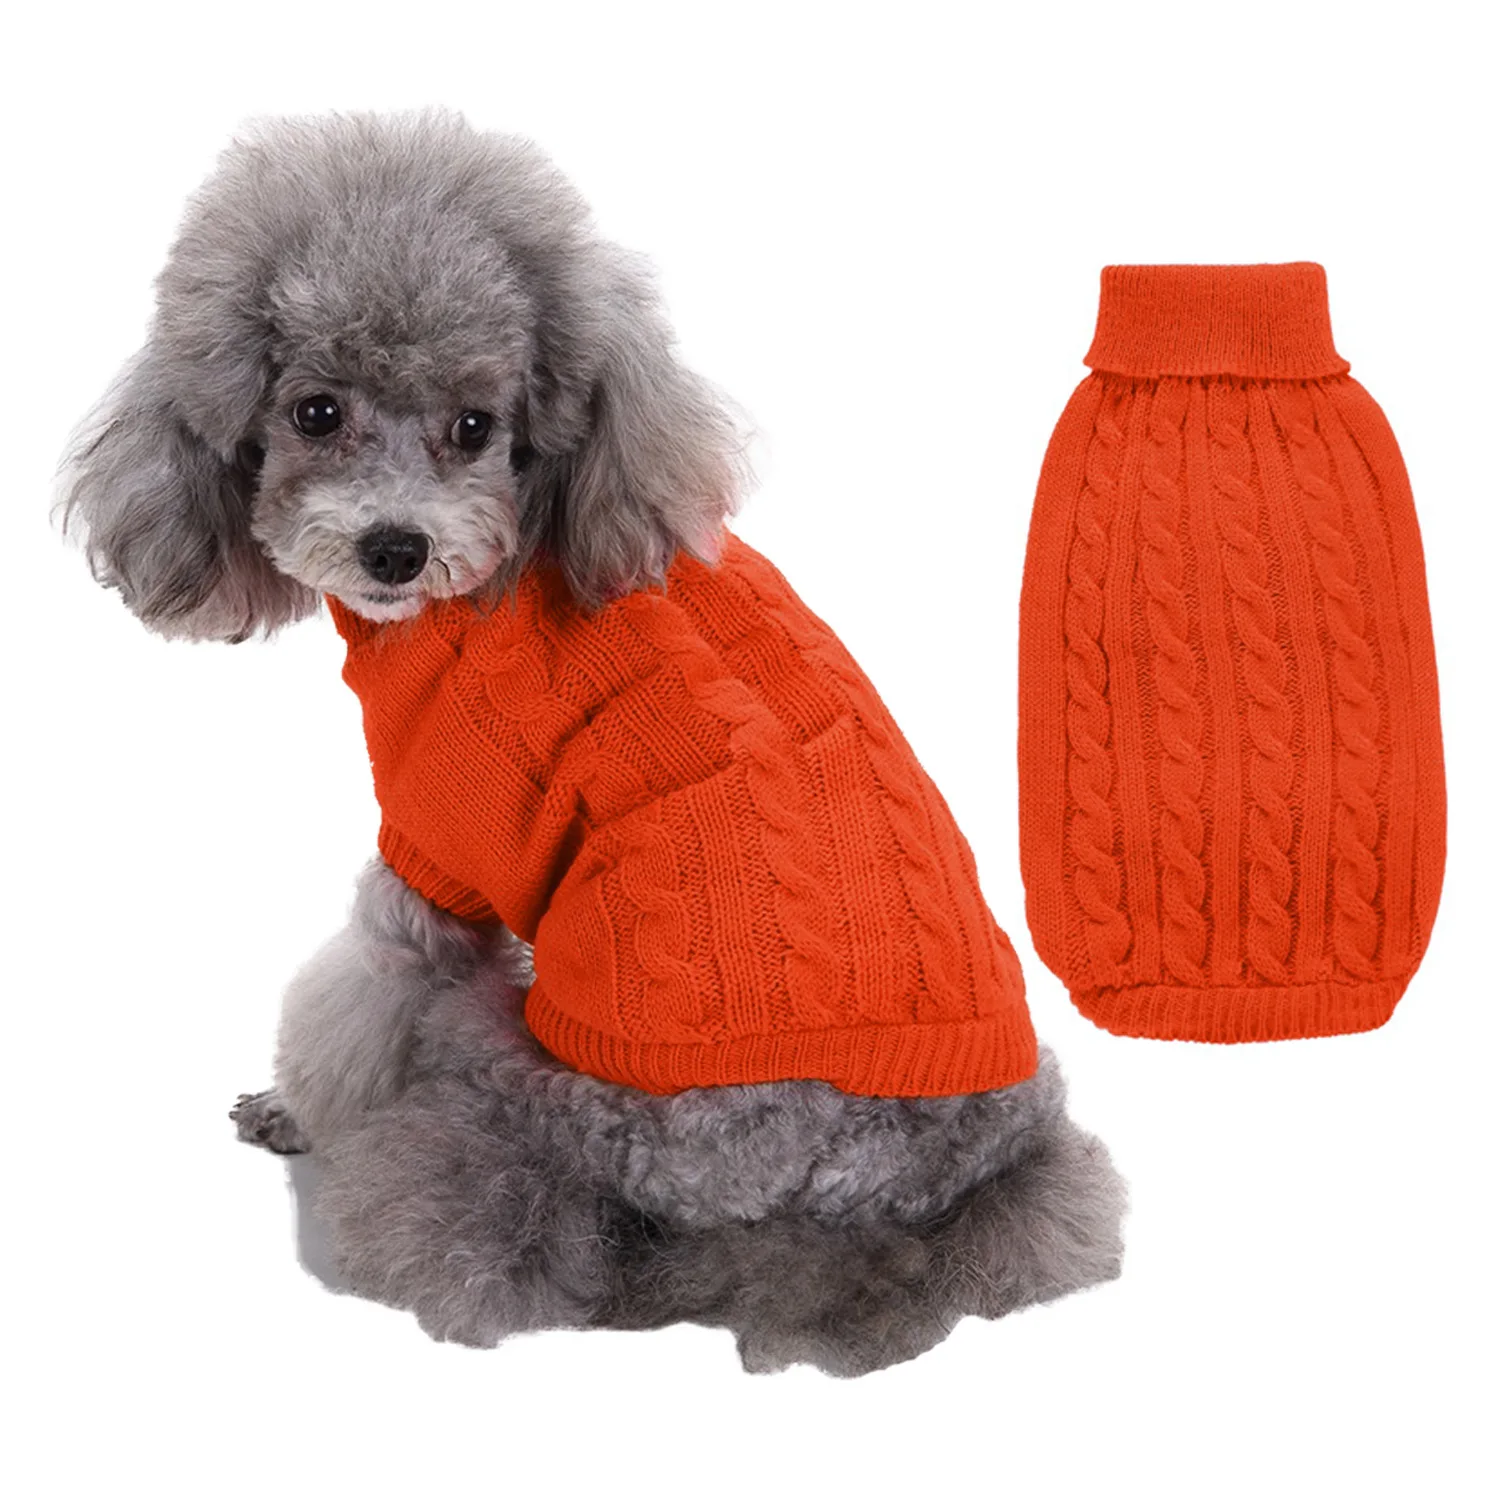 

Pet Dog Clothes Knitwear Sweater Soft Thickening Warm Pup Dogs Shirt Winter Puppy Sweater for Dogs, As picture, if need other color, please discuss with us